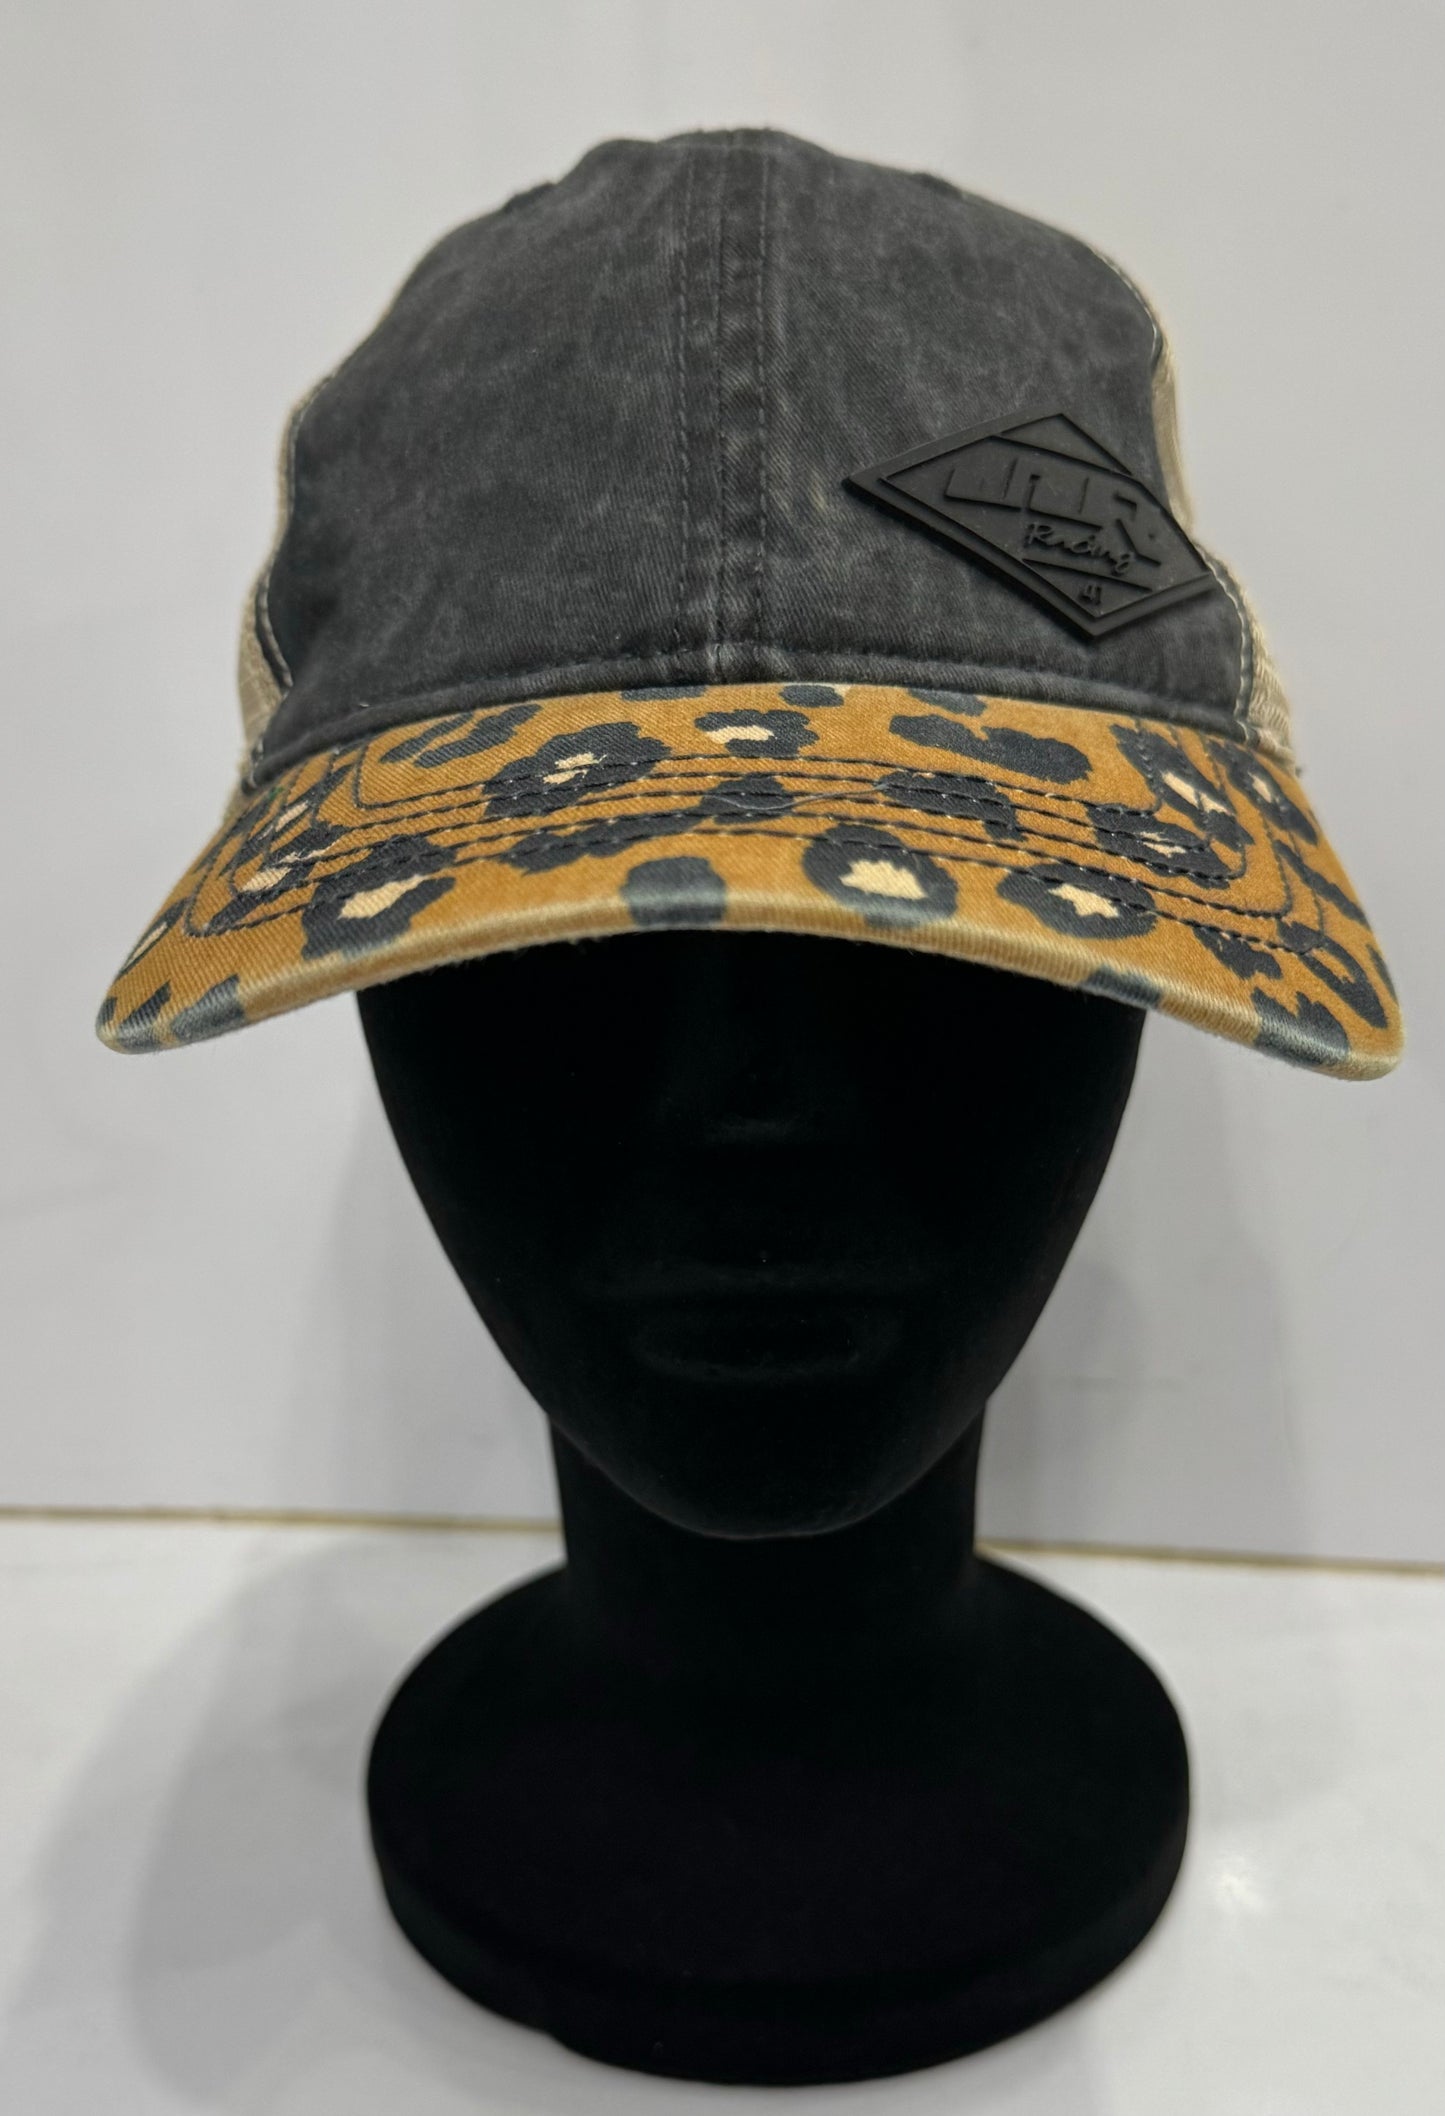 Ladies Rubber Triangle JJR Patch Cheetah SnapBack Hat